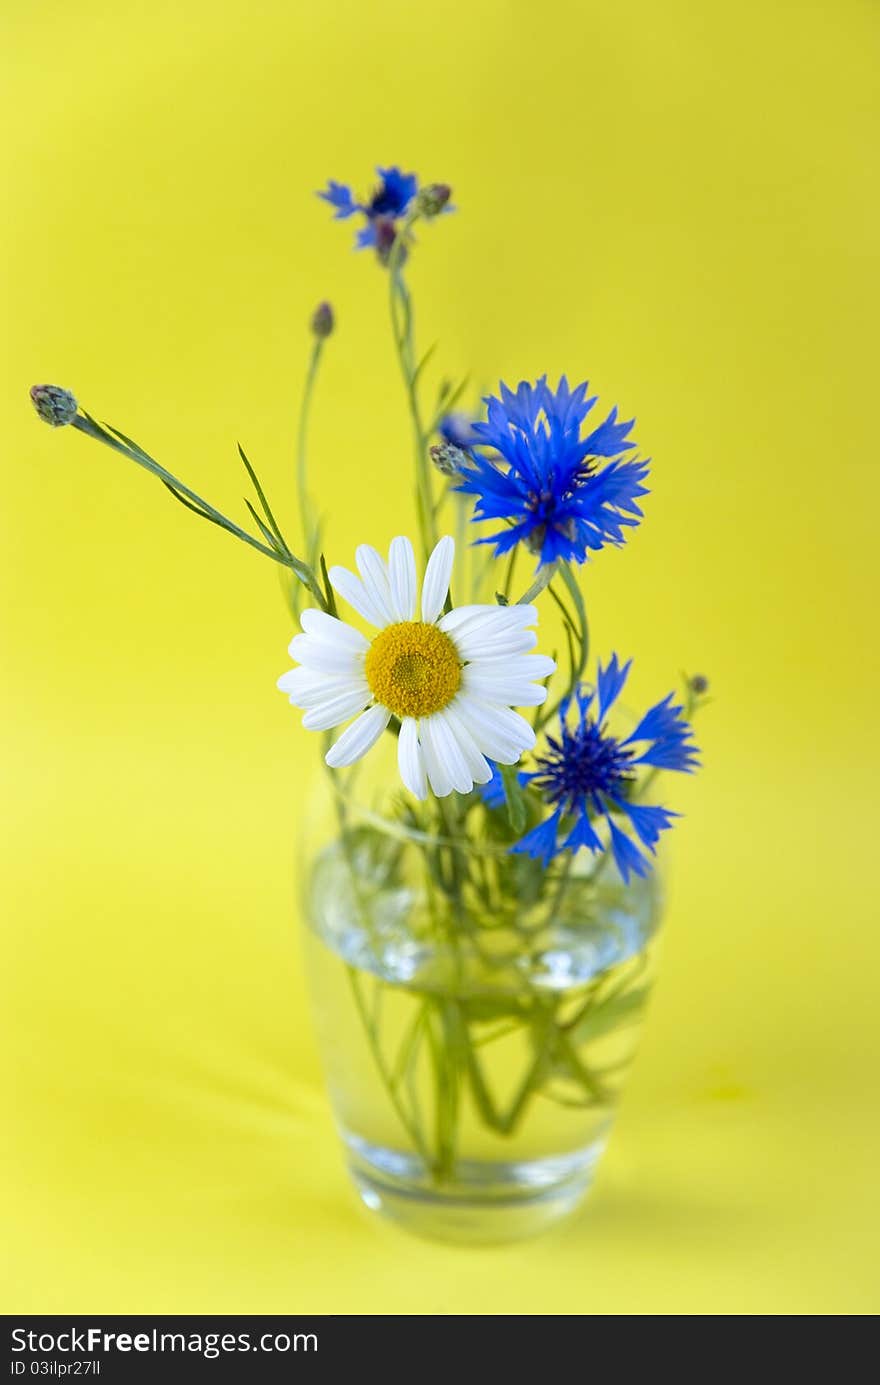 Wild flowers on a yellow background. Wild flowers on a yellow background